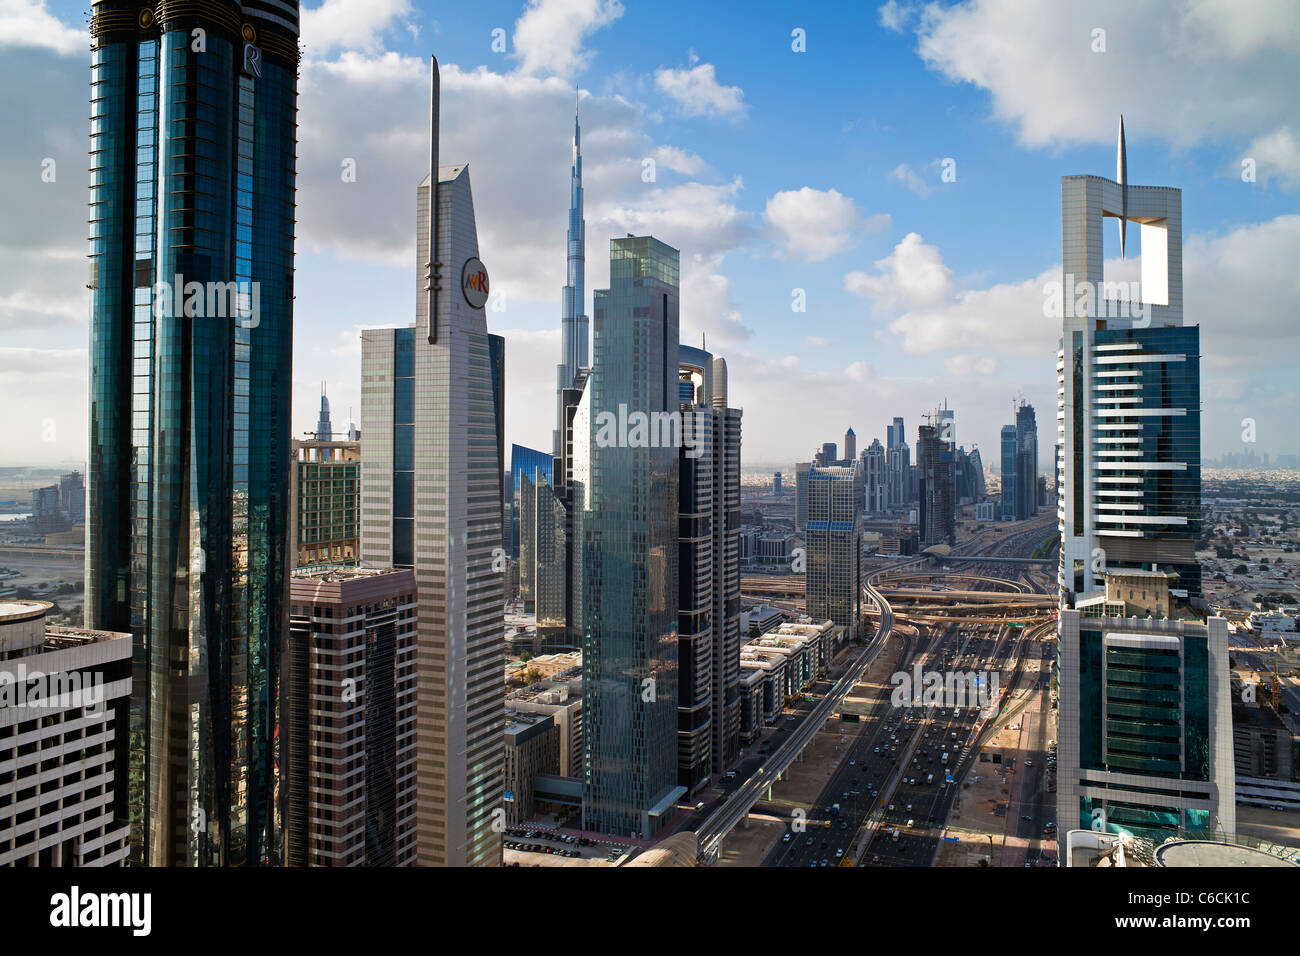 Elevated view over the modern Skyscrapers along Sheikh Zayed Road looking towards the Burj Kalifa, Dubai, United Arab Emirates Stock Photo